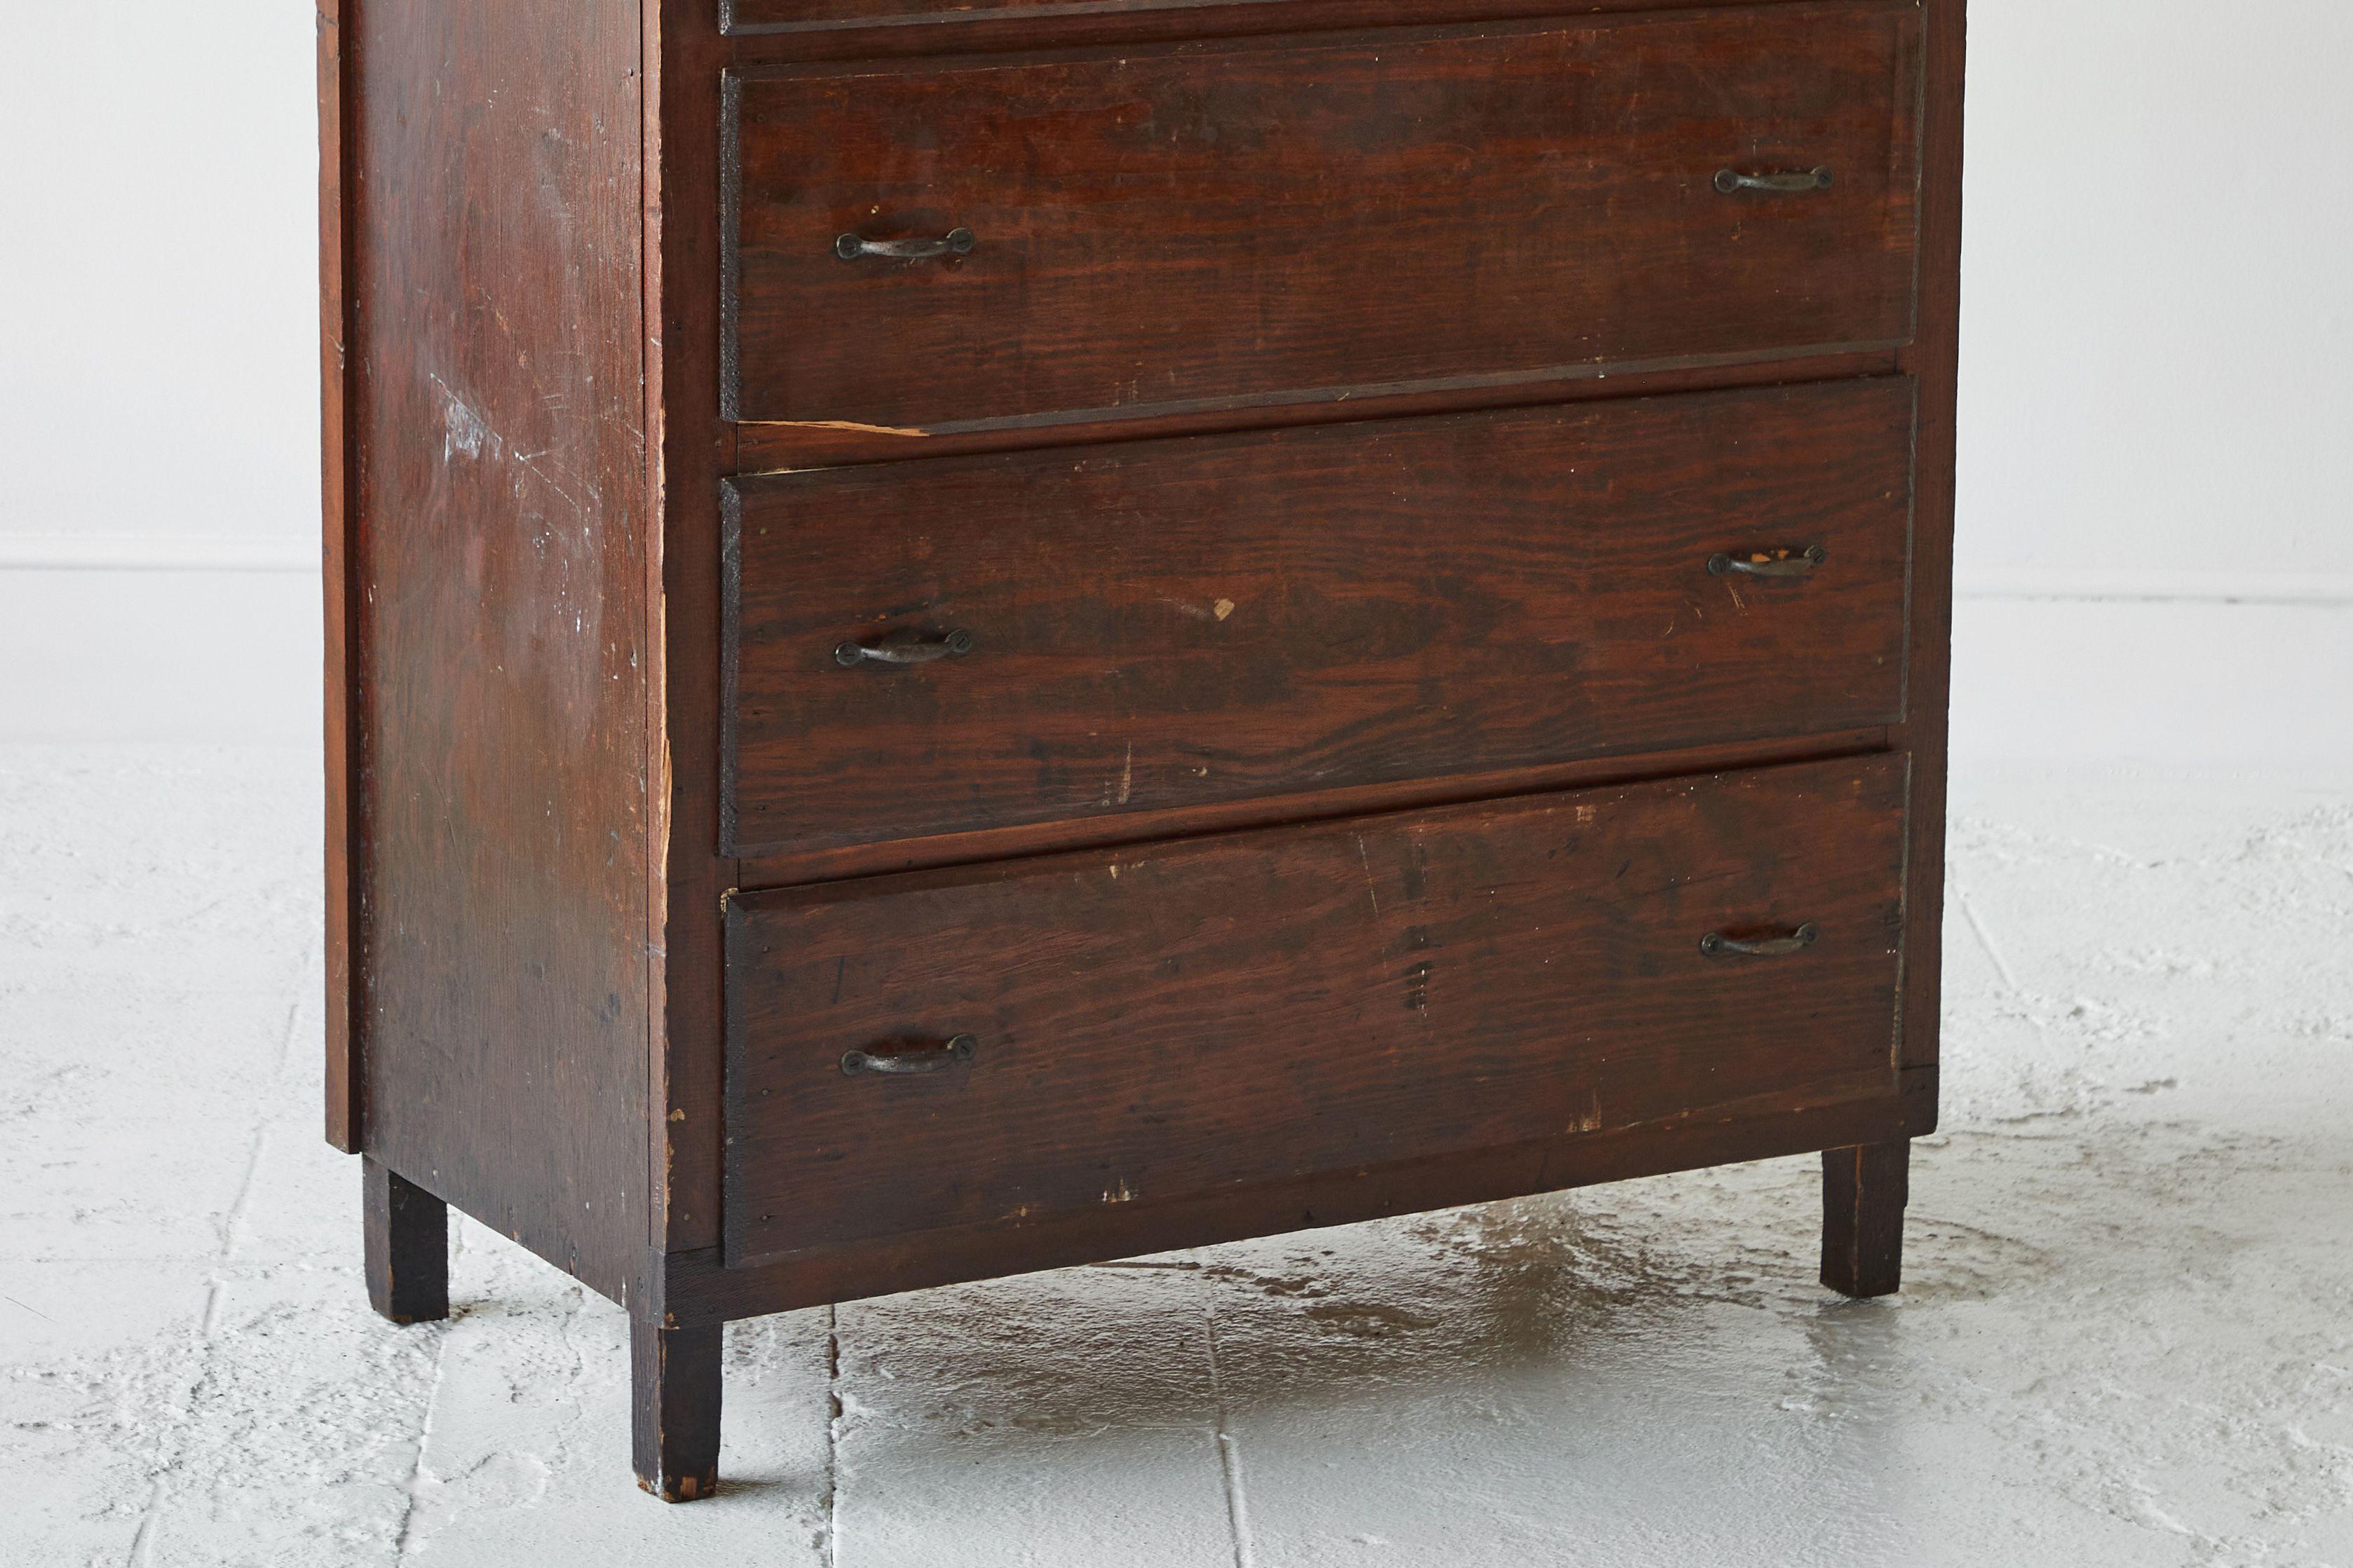 Early American rustic tall chest of drawer, natural stain with a crown top and original hardware.